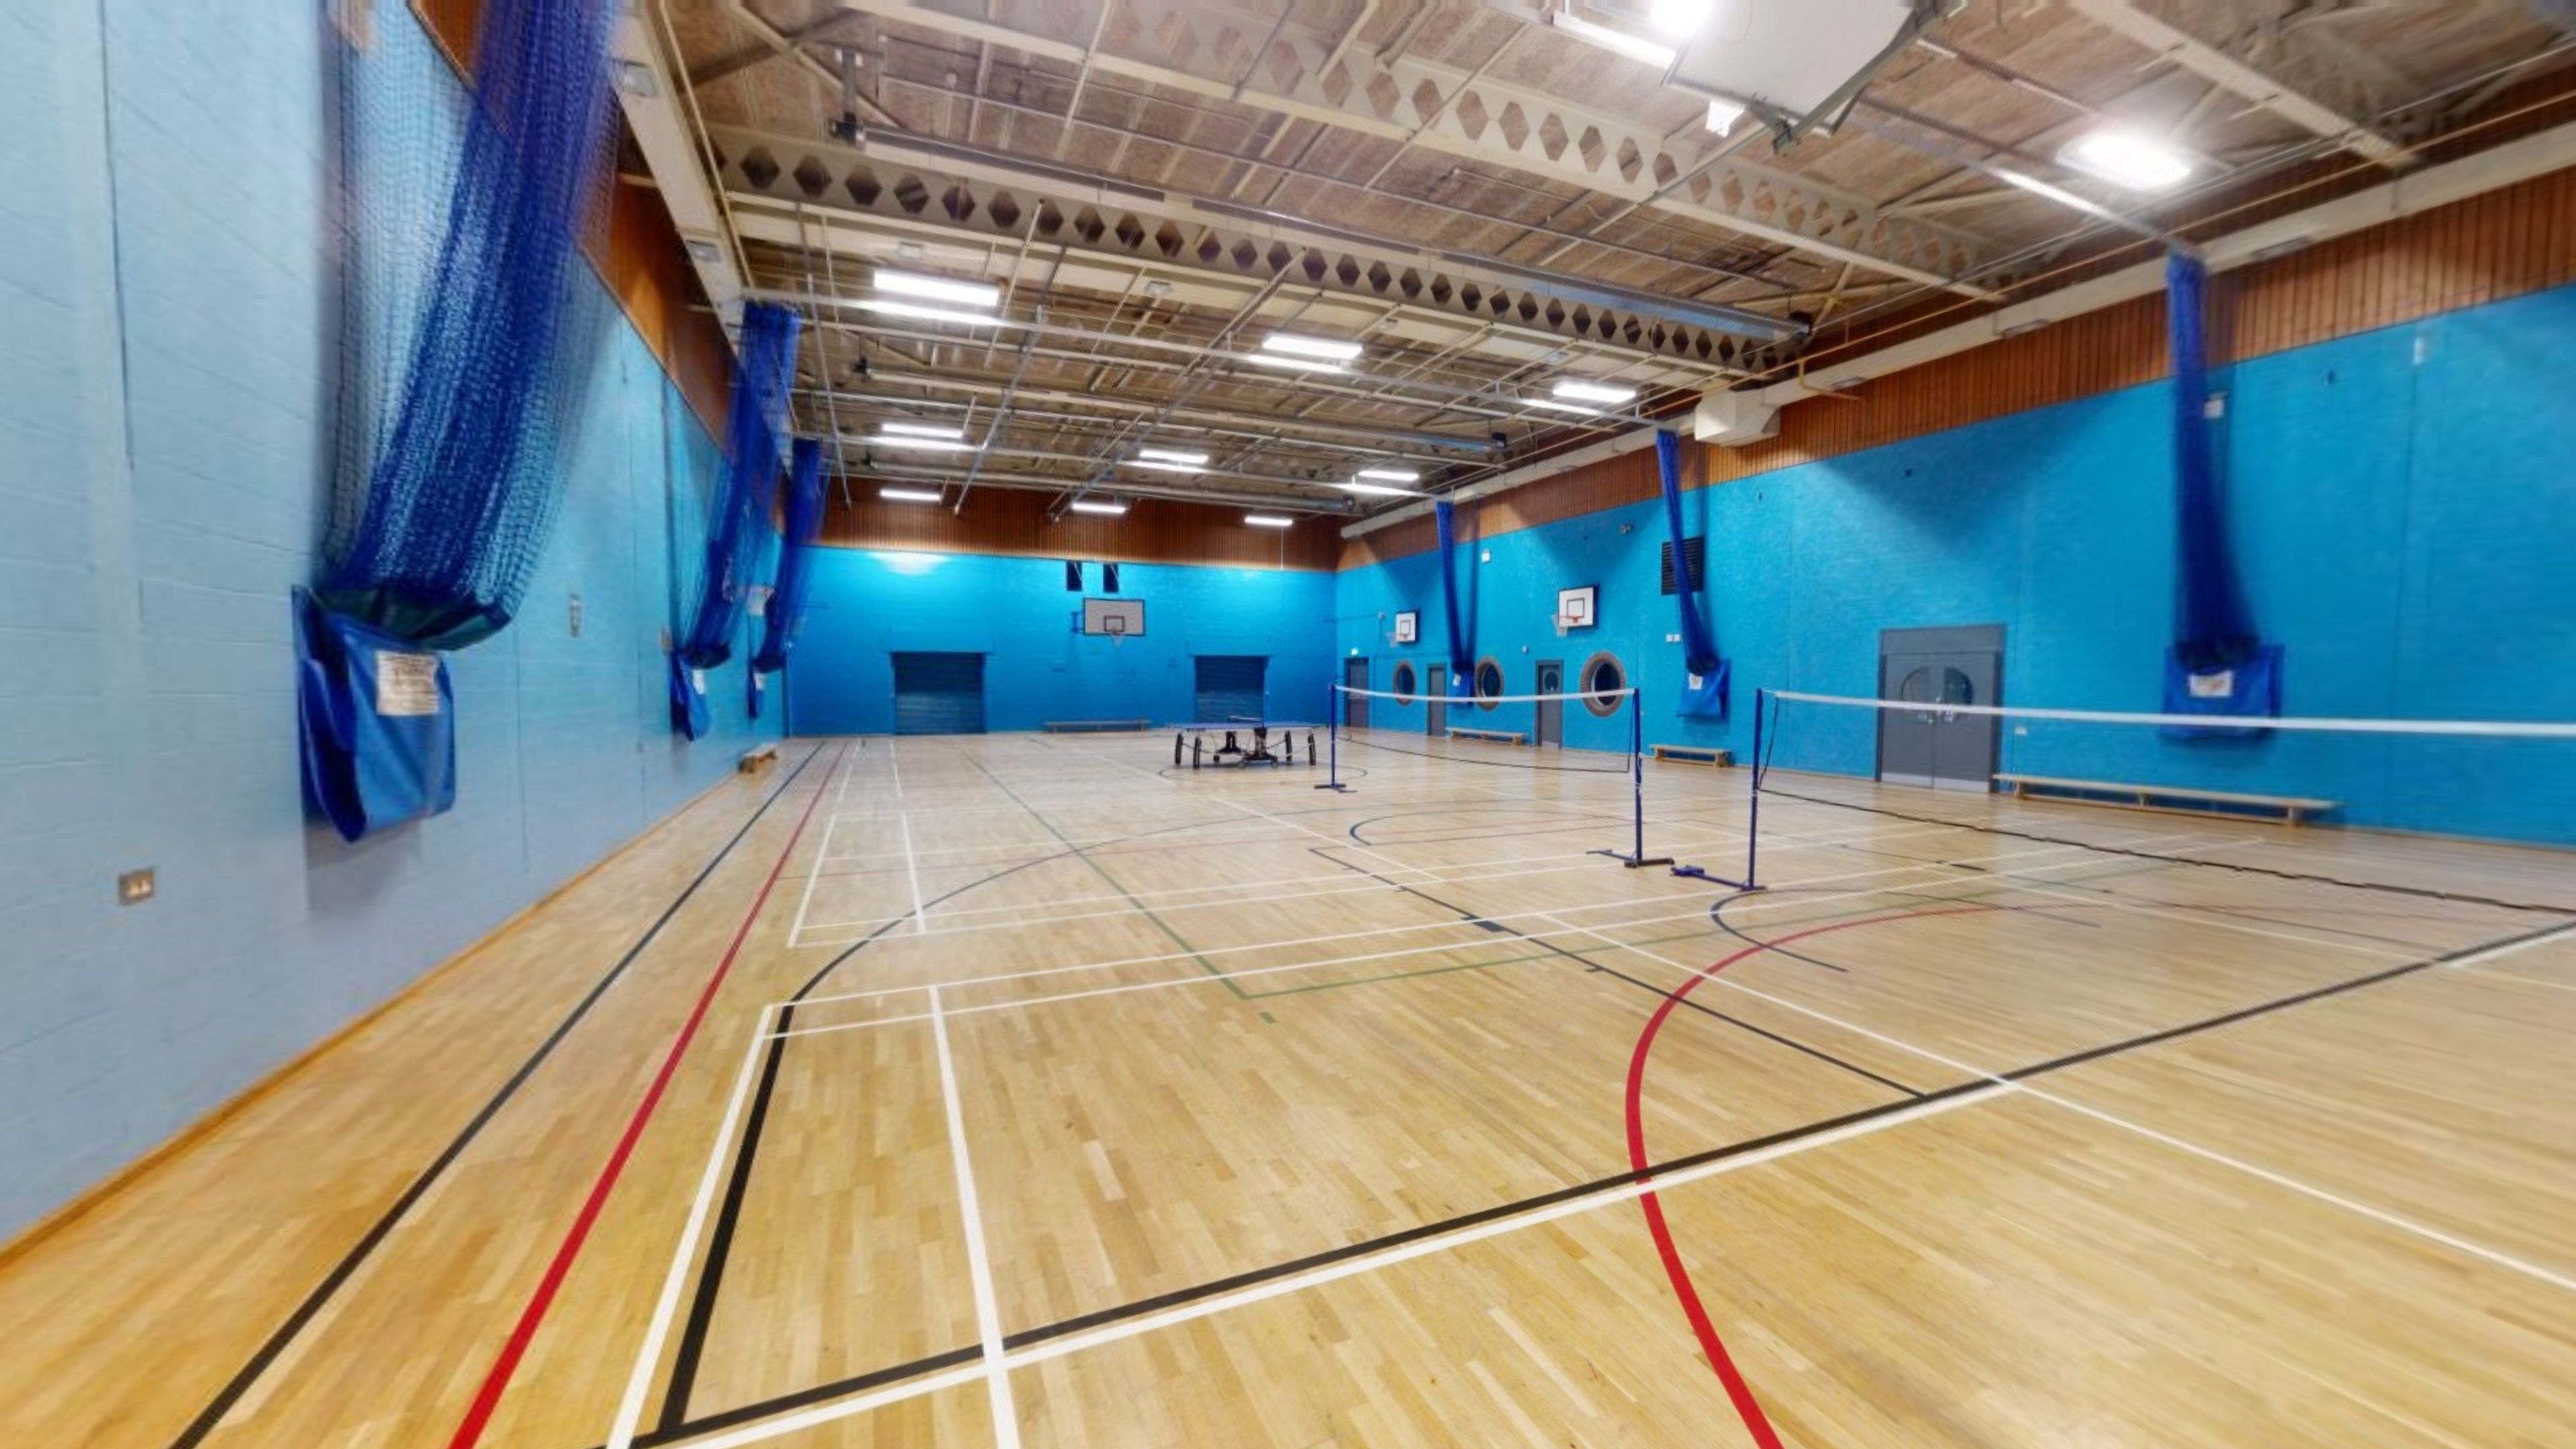 Sports hall at St Crispin's Leisure Centre St Crispin's Leisure Centre Wokingham 01189 791066